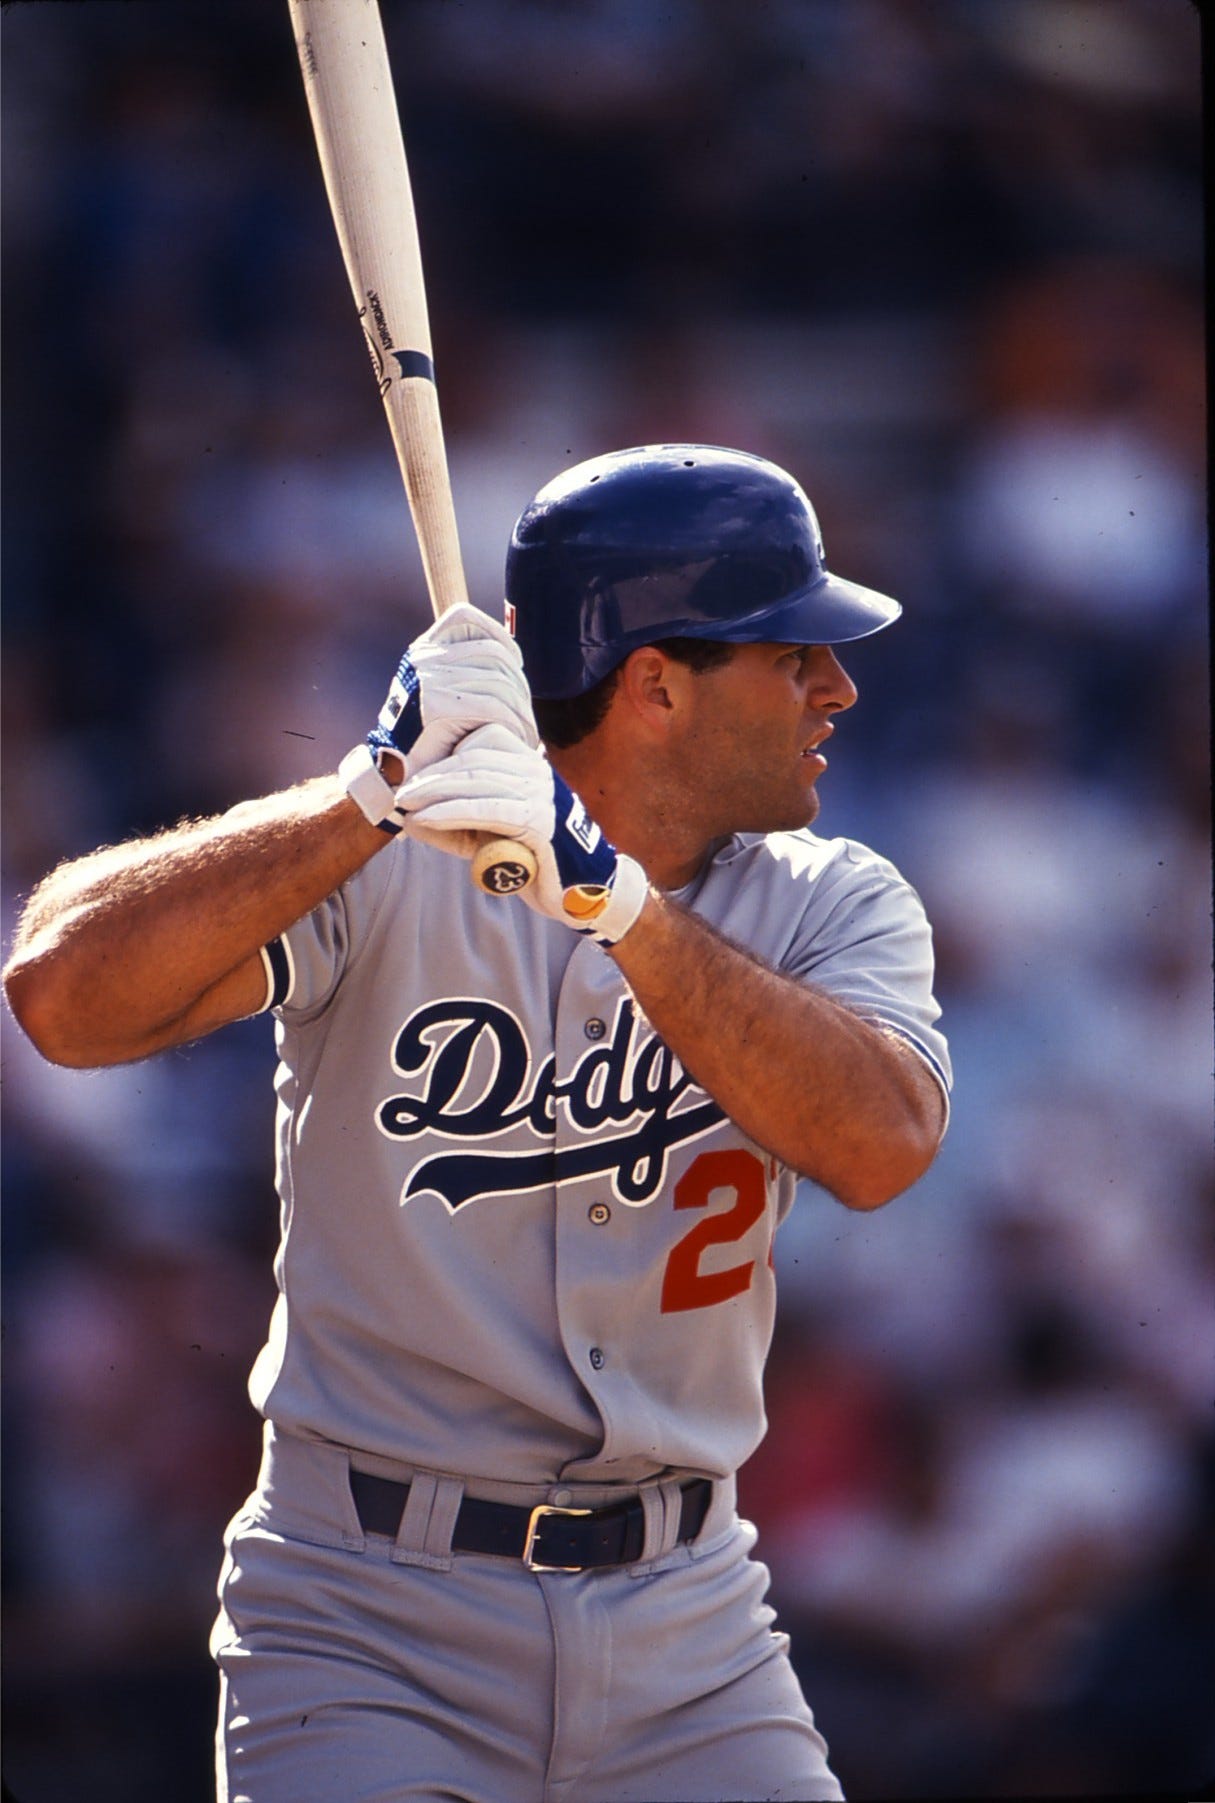 Preview of the LA Dodgers Season With Eric Karros